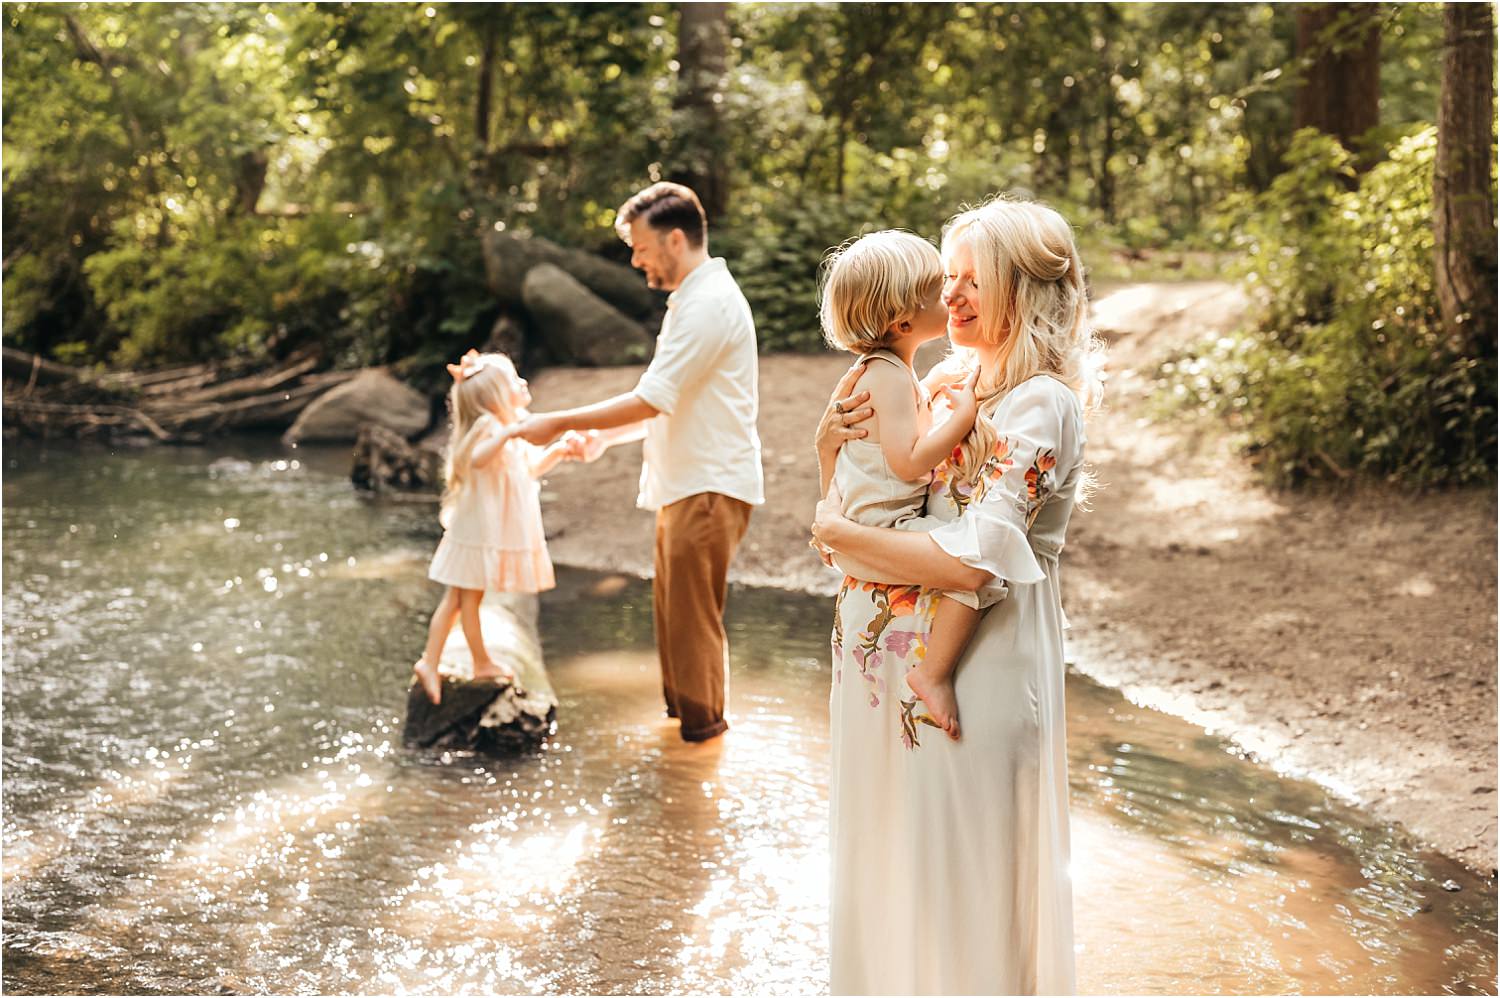 Maternity Session in a River | Sara